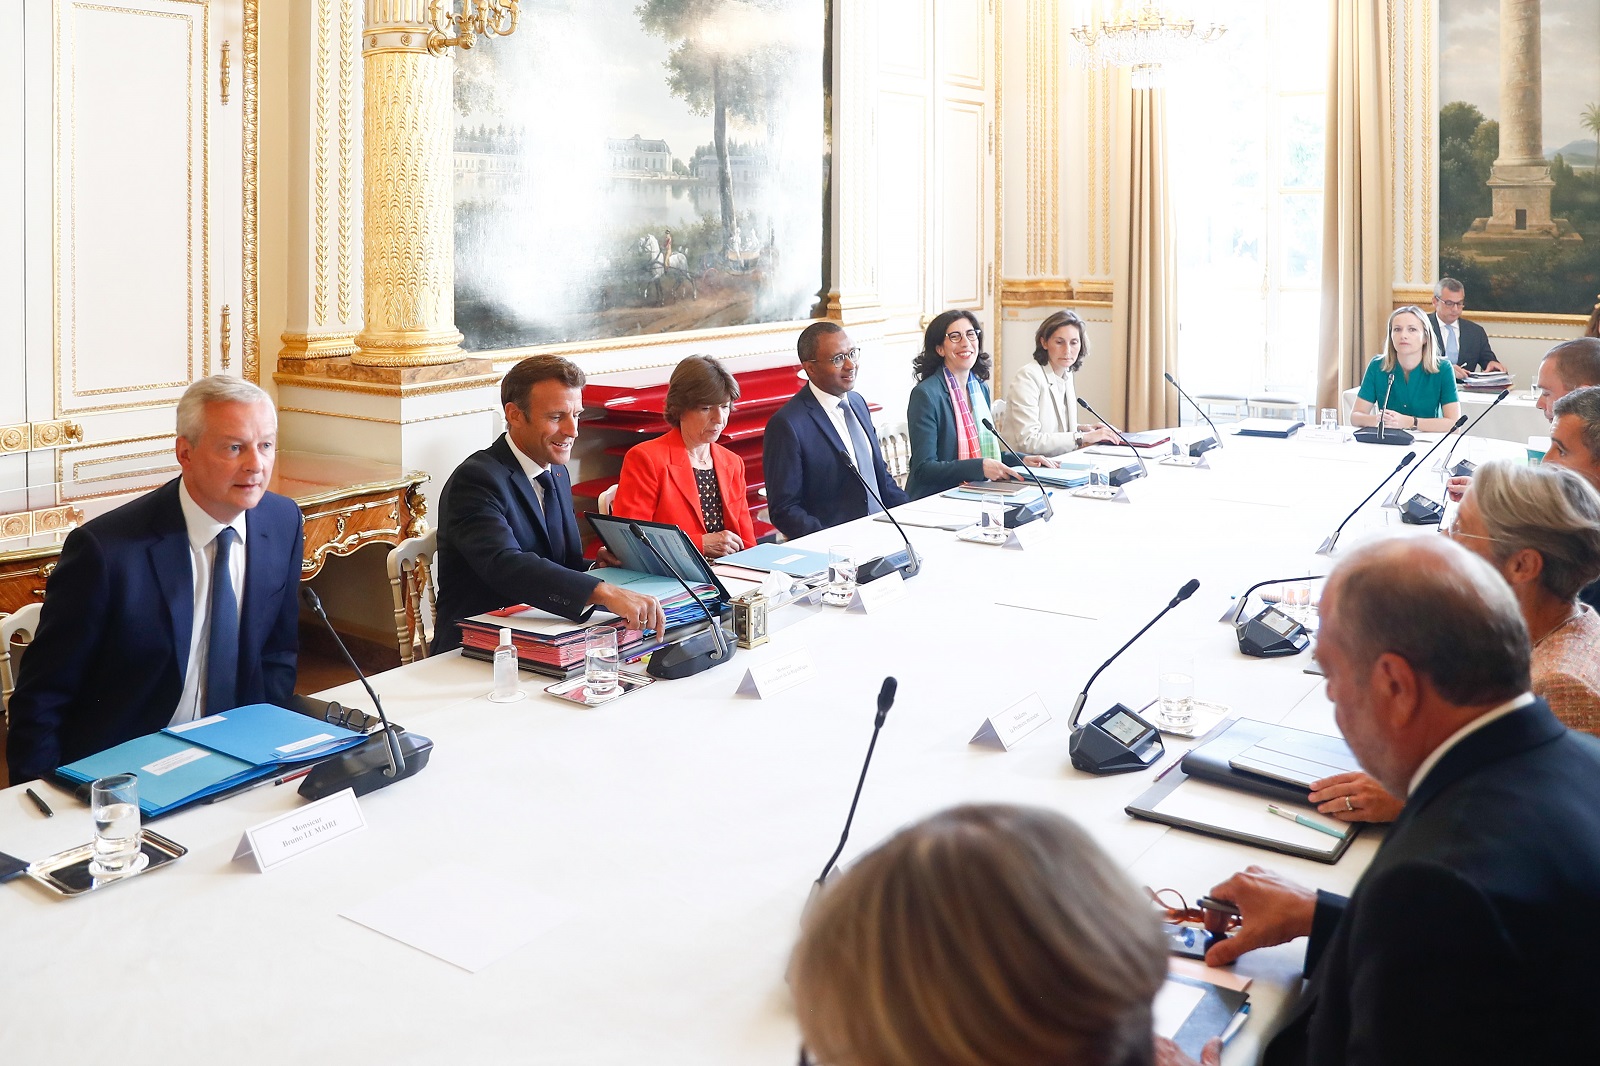 epa10135650 French President Emmanuel Macron (2-L), Economy Minister Bruno Le Maire (L), Foreign Minister Catherine Colonna (C), French Education Minister Pap Ndiaye (4-L) and French Culture Minister Rima Abdul Malak (5-L) attend the cabinet meeting with ministers at the Elysee Palace in Paris, France, 24 August 2022.  EPA/MOHAMMED BADRA / POOL